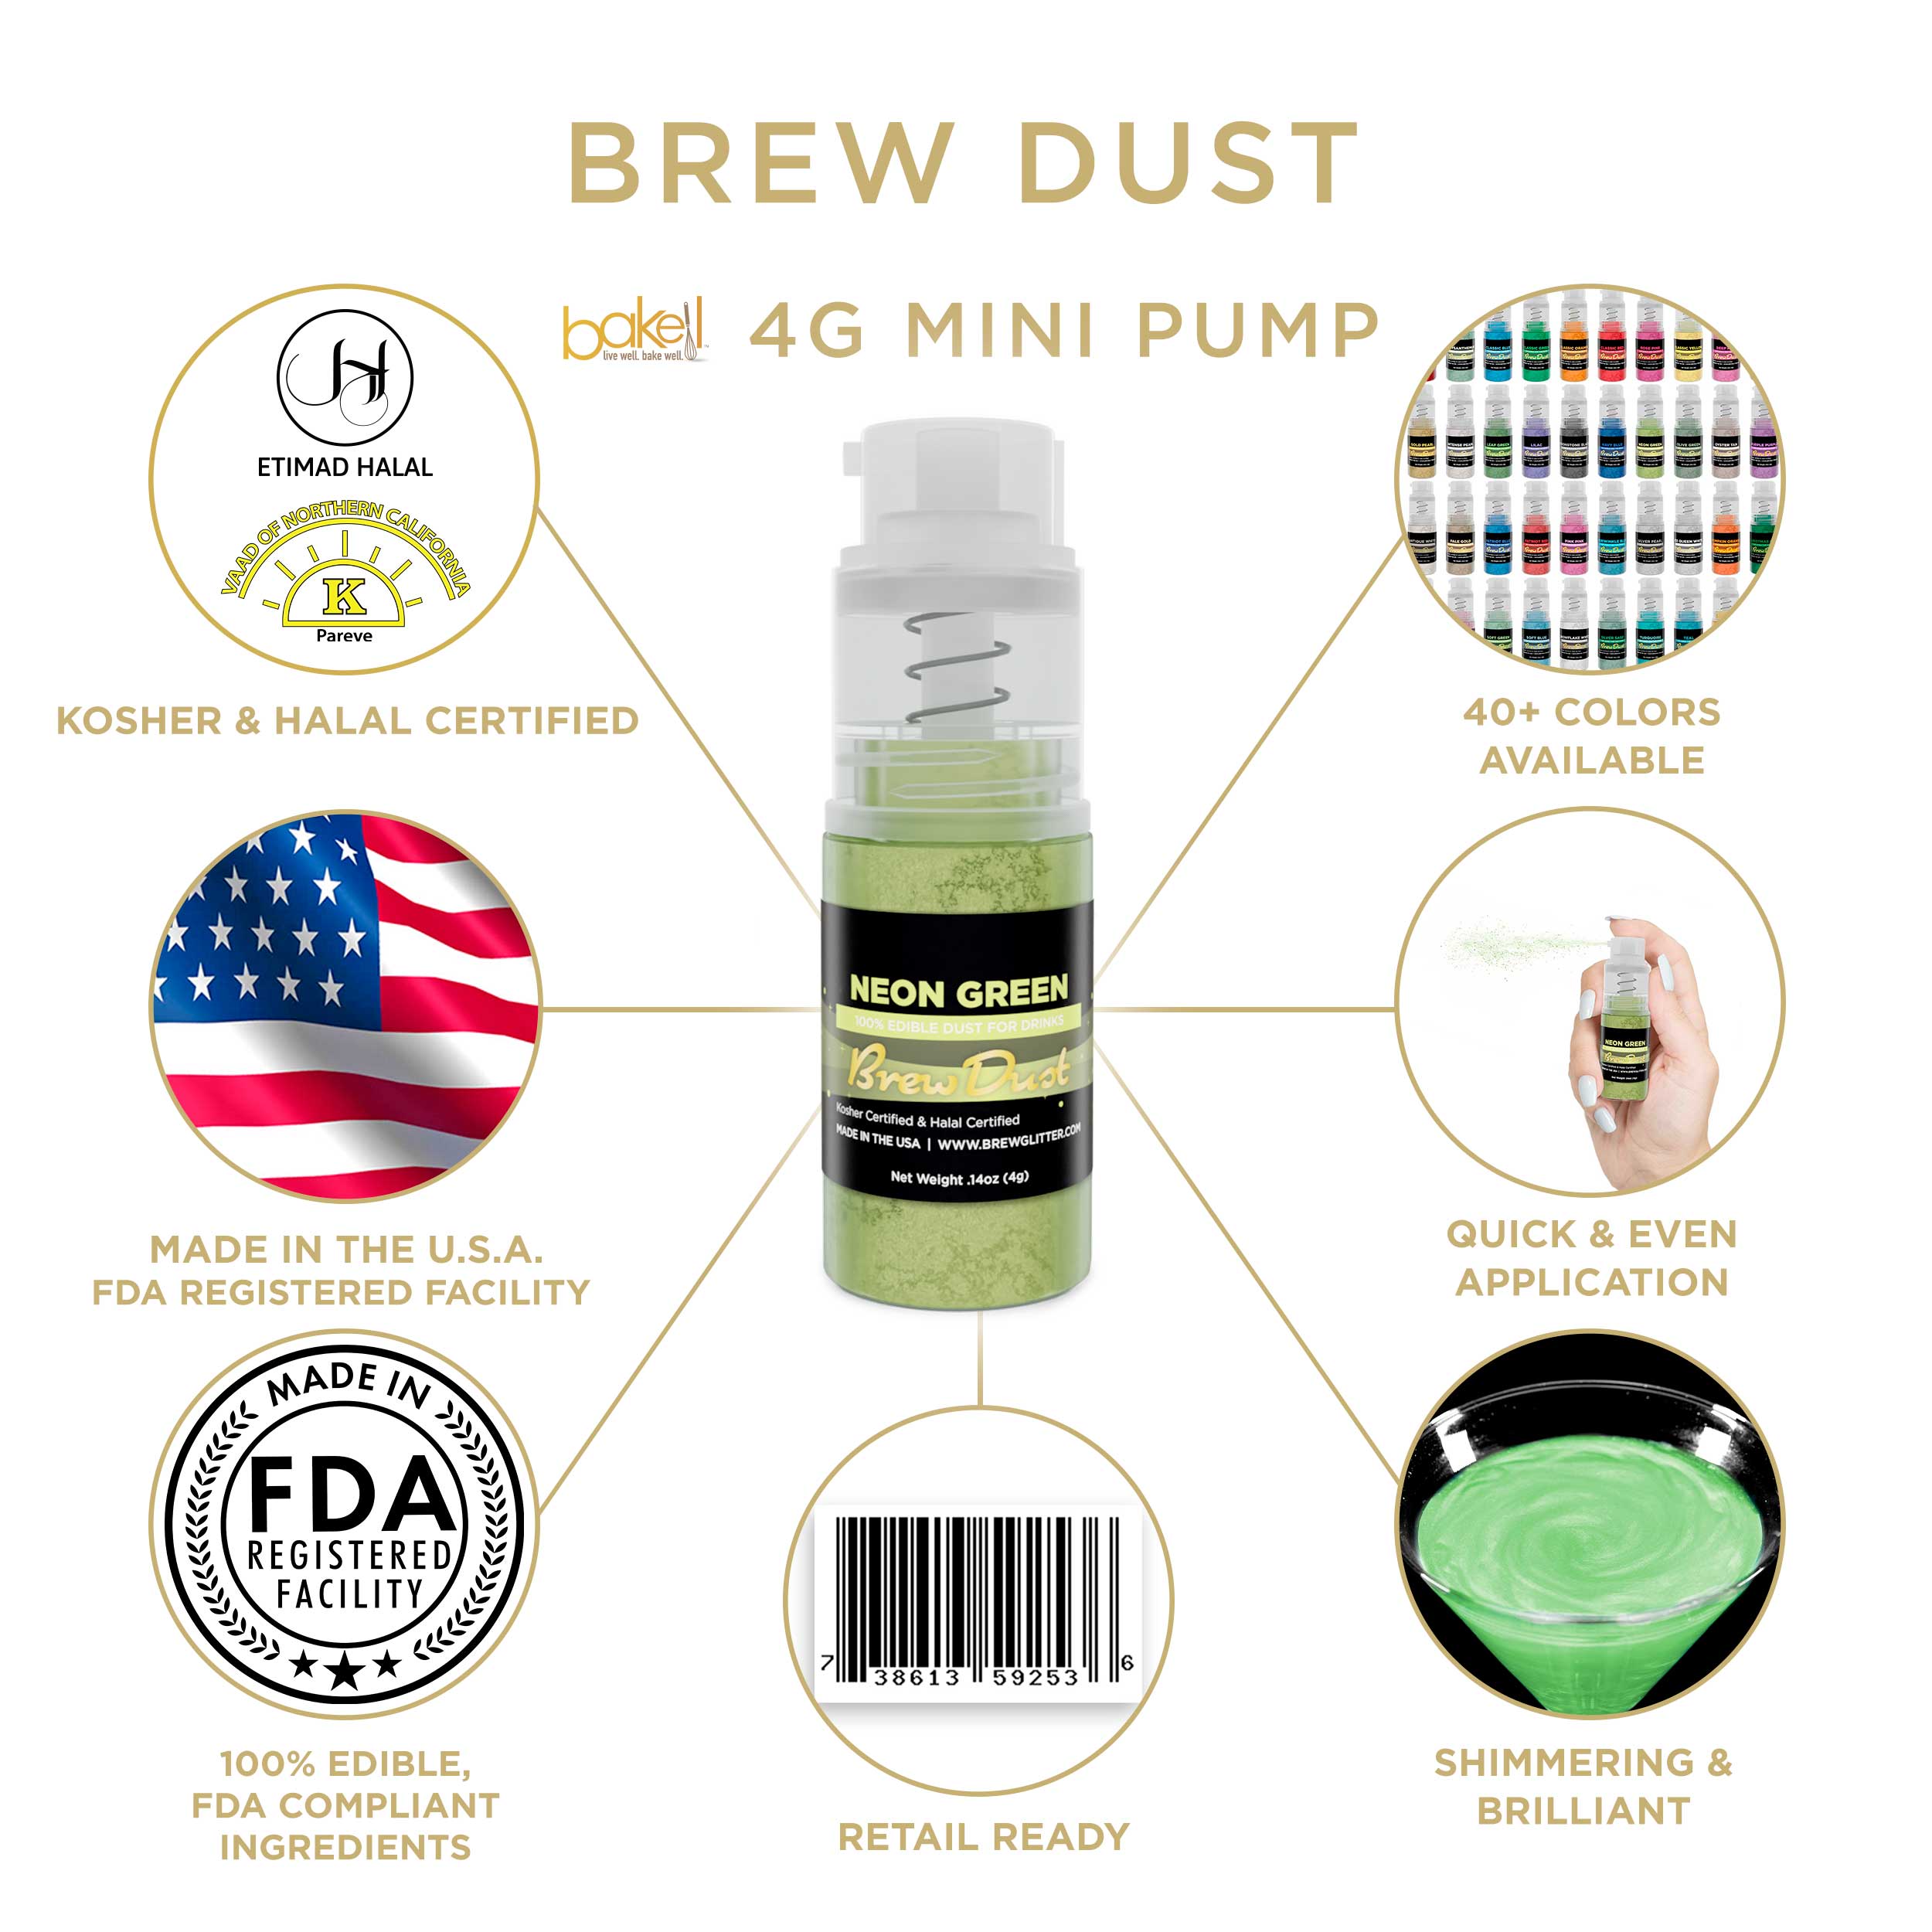 Neon Green Brew Dust Miniature Spray Pump | Infographic and Information